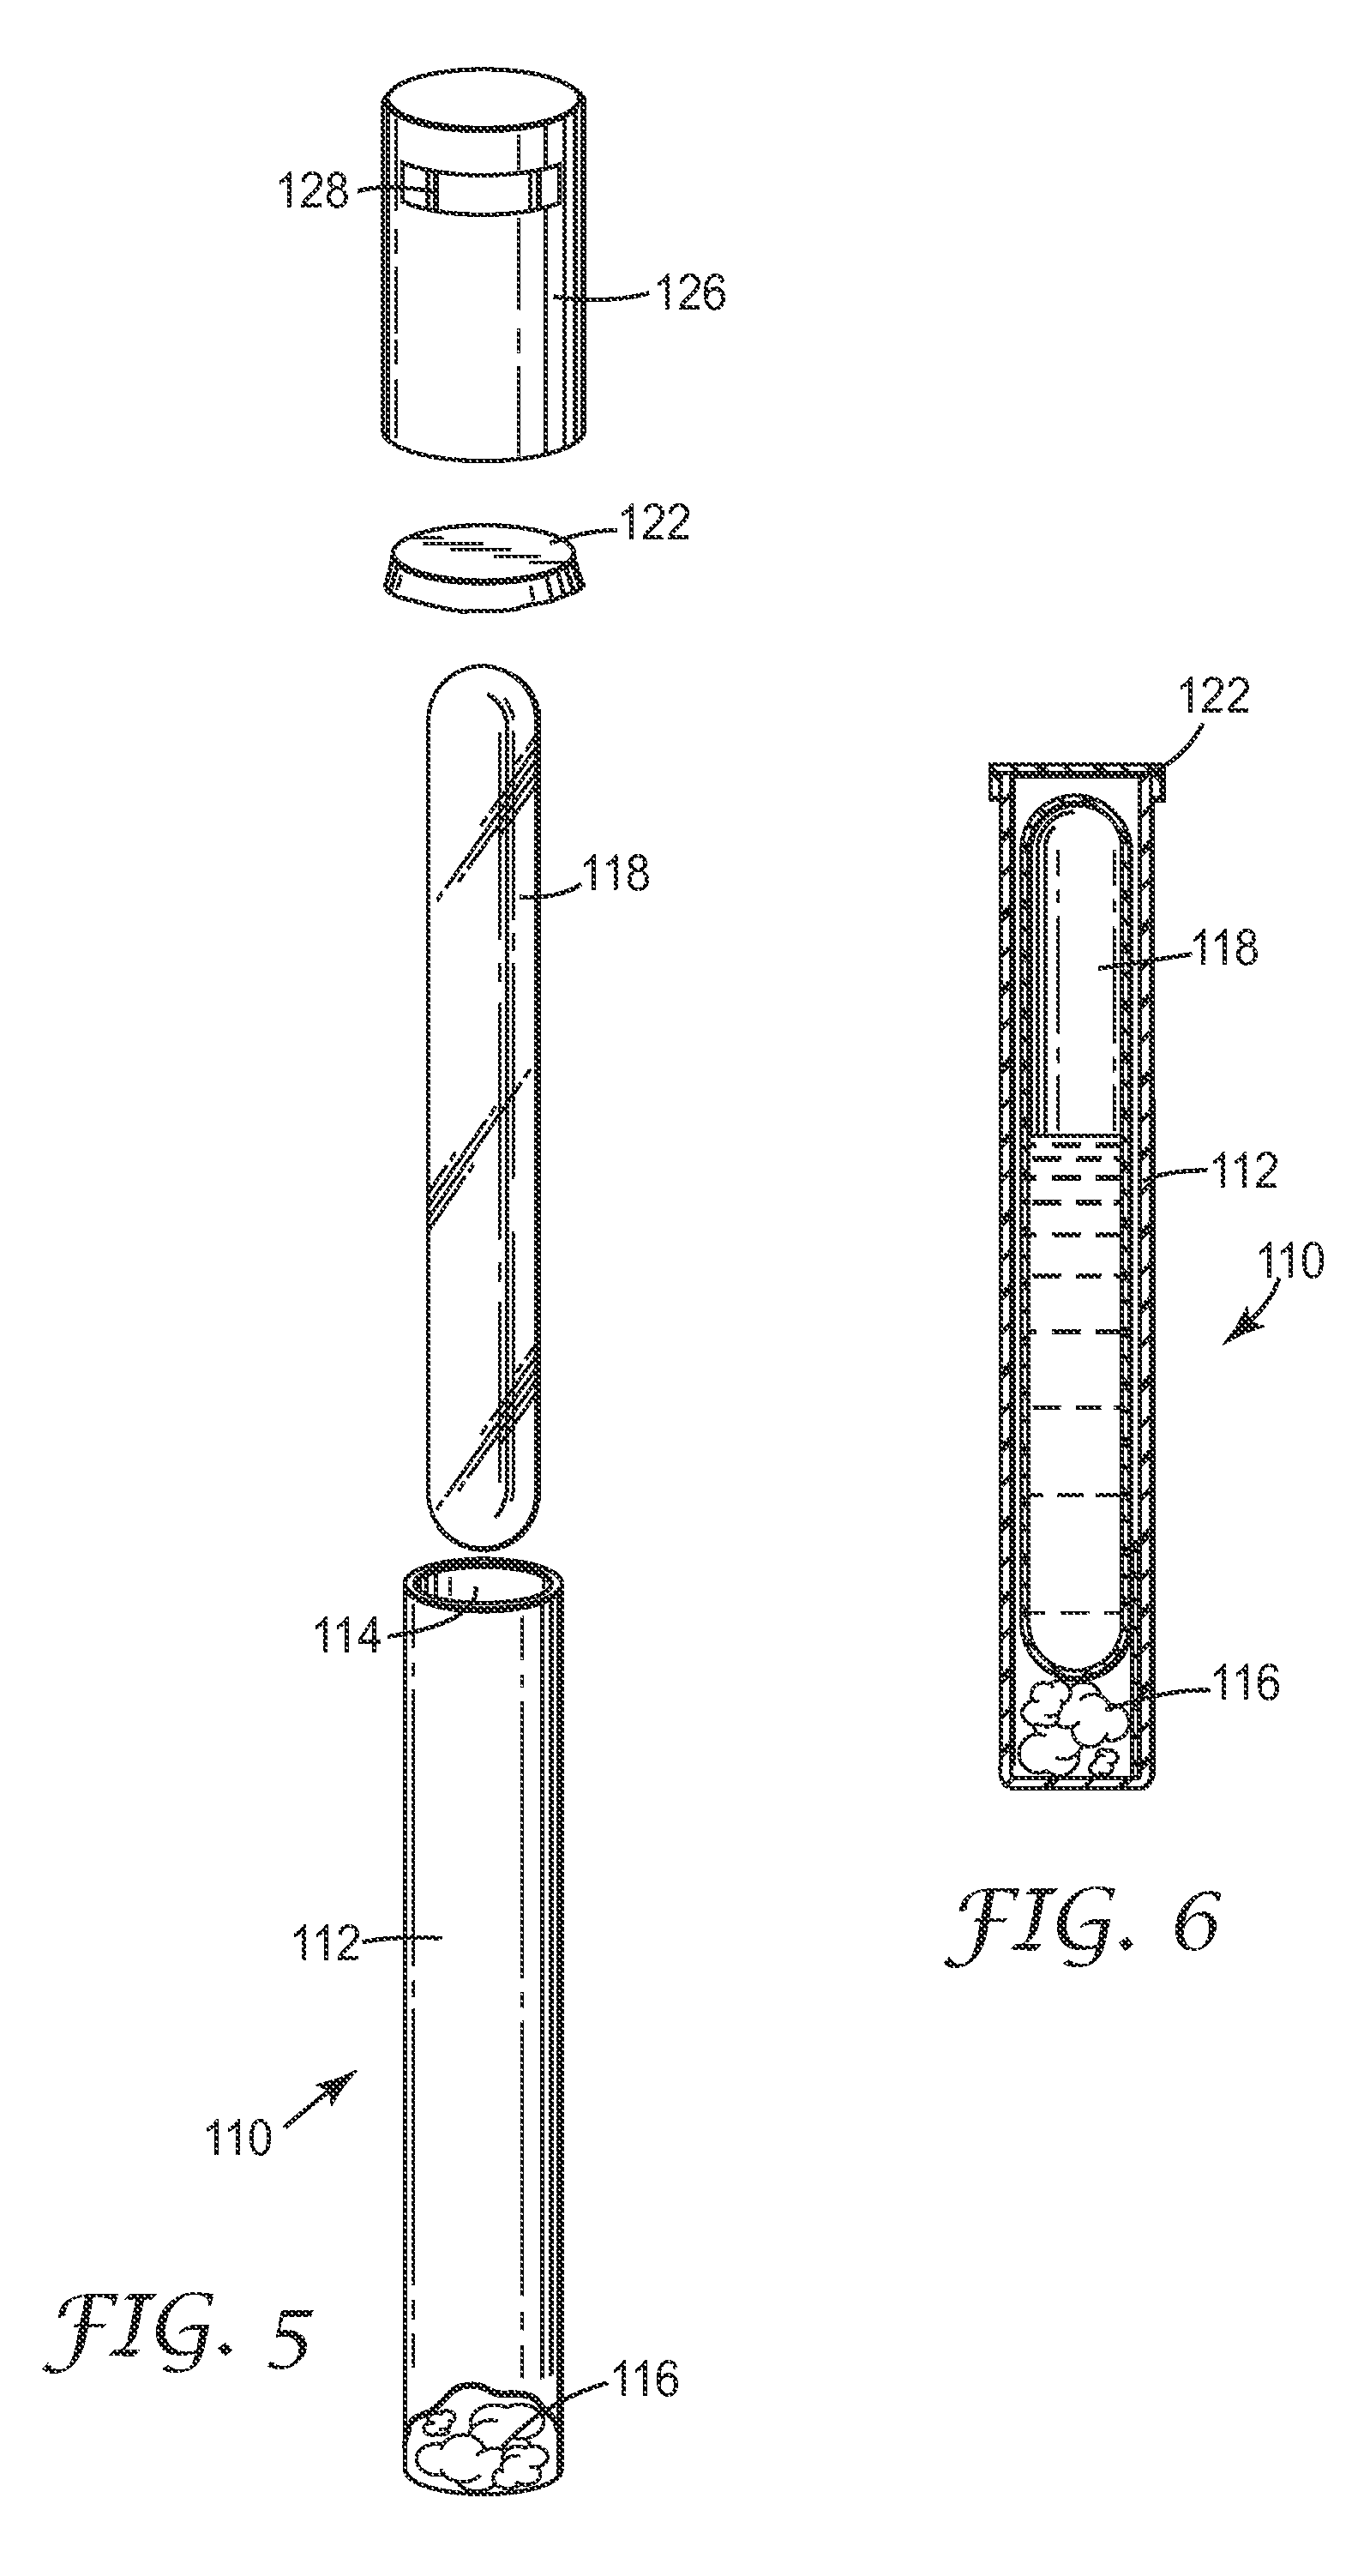 Self-contained sterilization indicators including a neutralizer for residual oxidizing sterilant